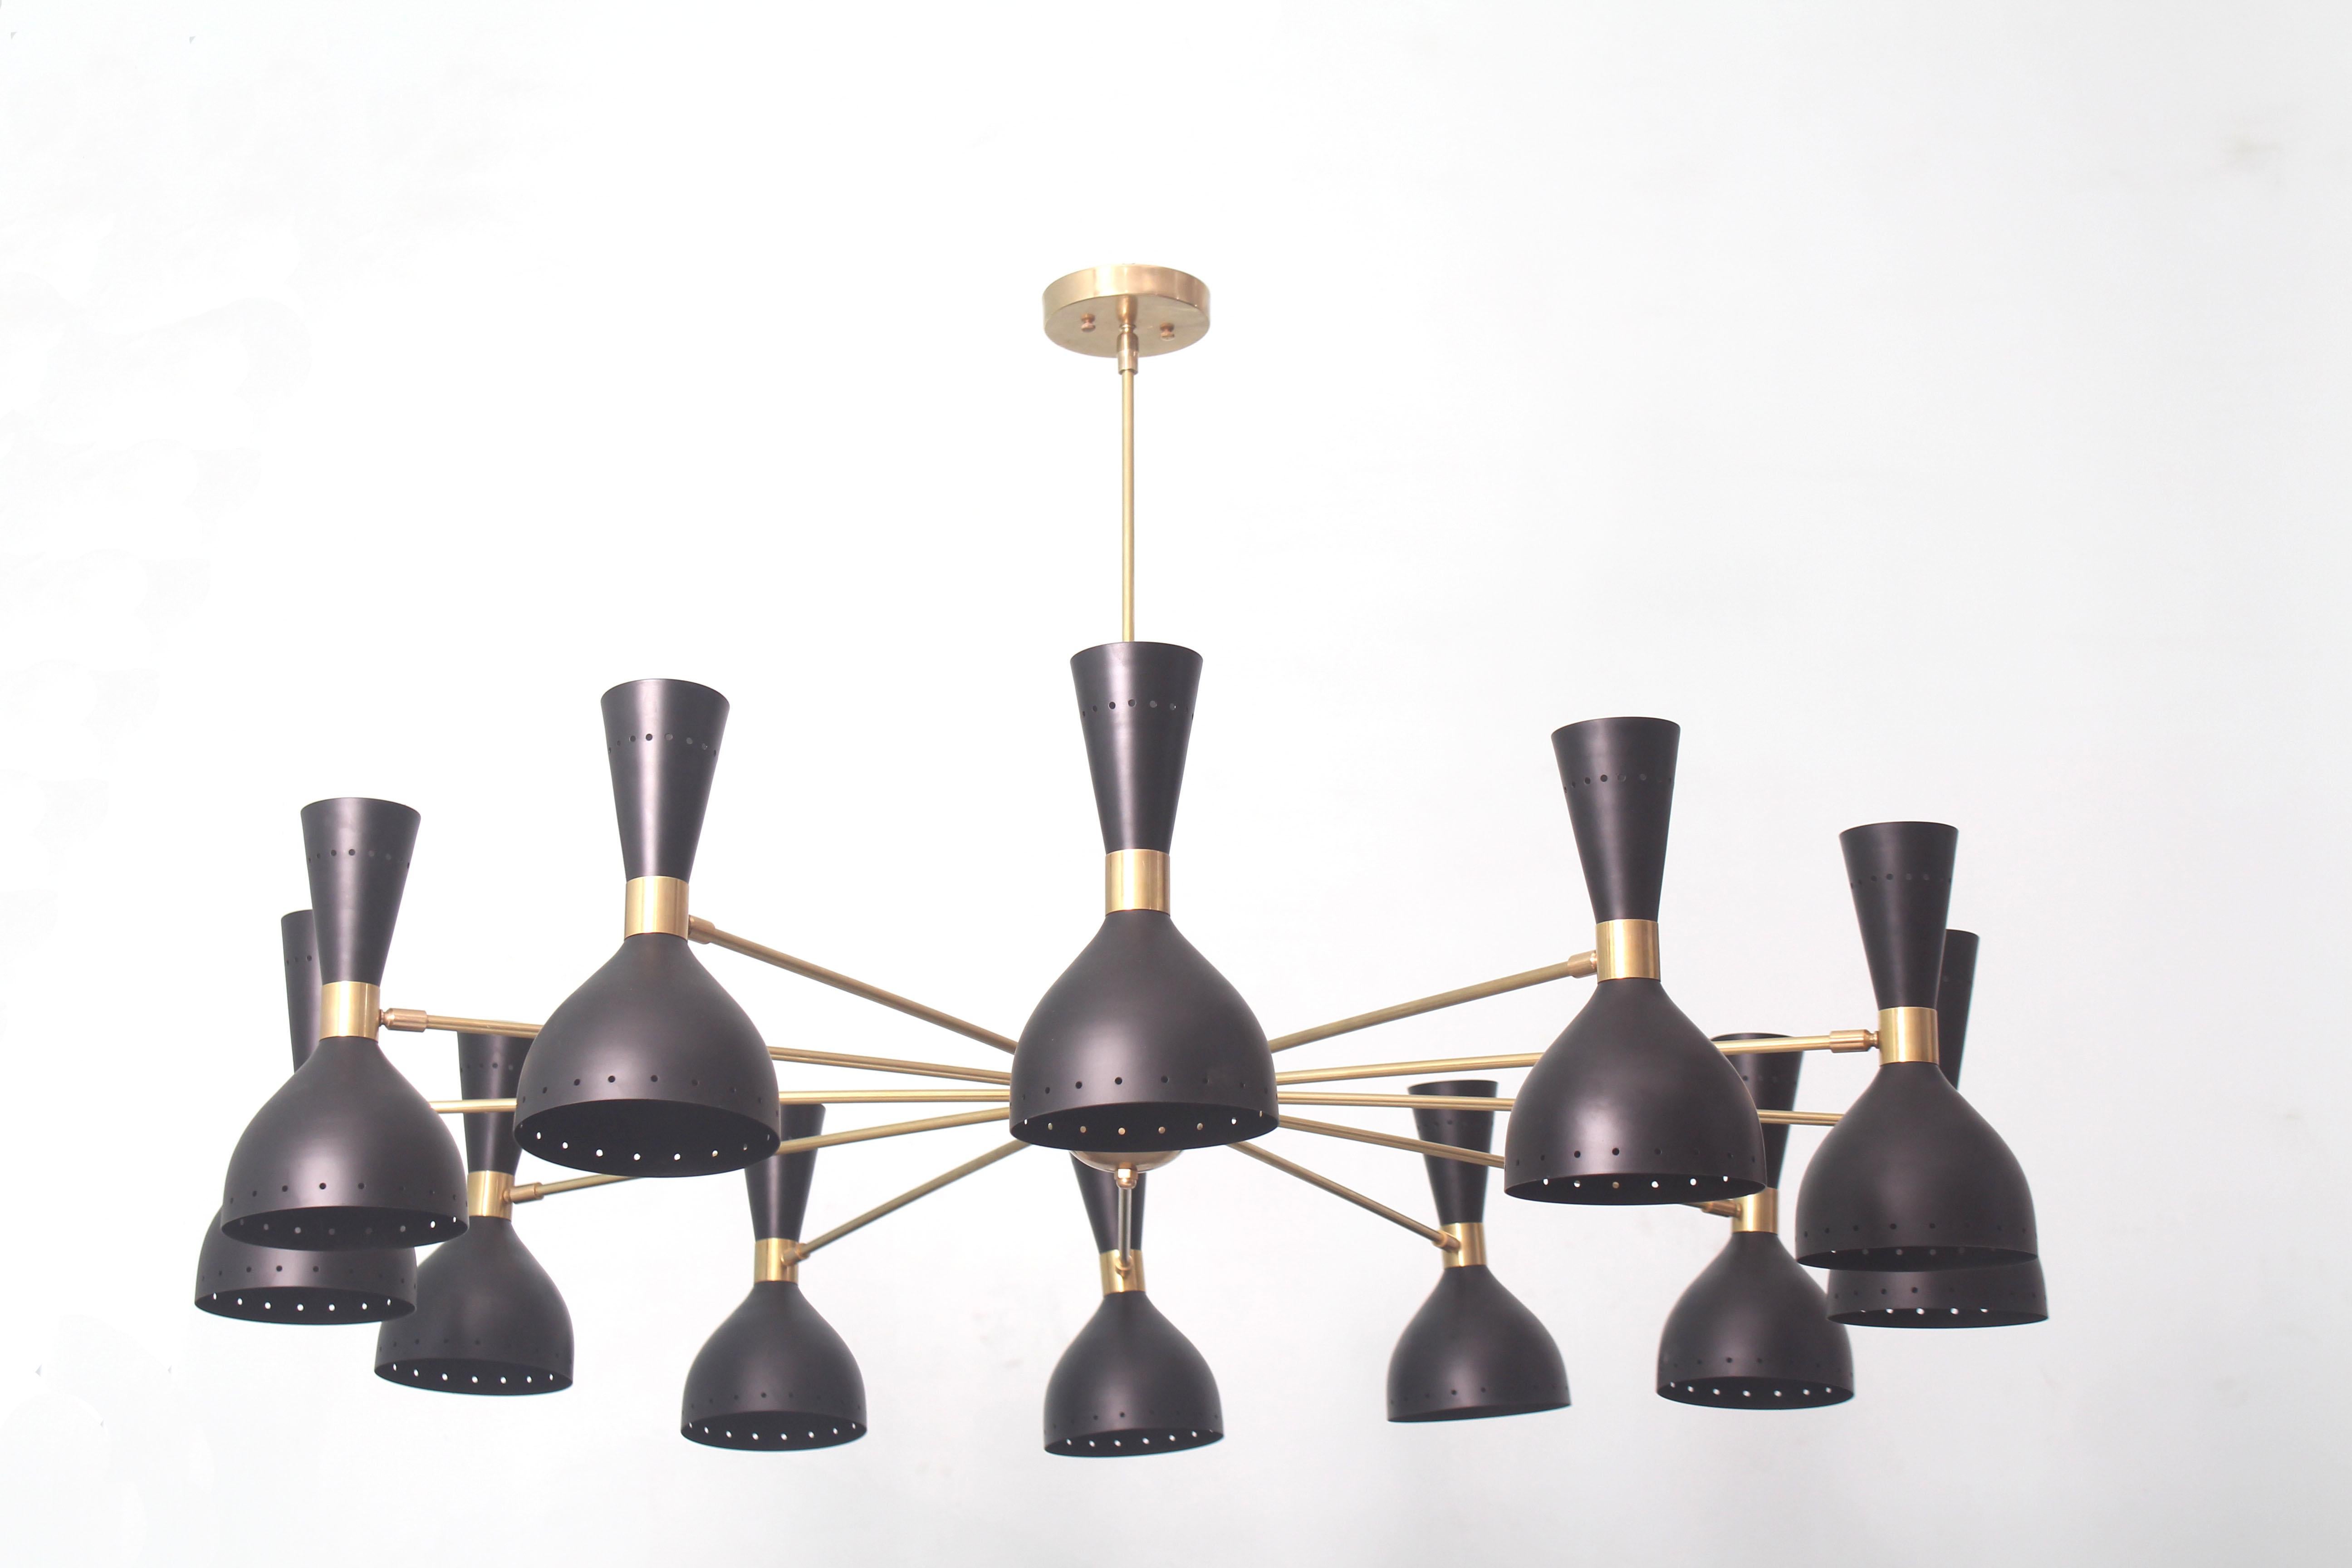 Customizable Large Stilnovo inspired 12 arm chandelier with 24 lights. 

Socket are E12 candelabra size rated at 60 watt for bottom section and 25 watt for top part. No wattage limits with LED bulb .  Recommended ! 

All lamp shade are ajustable in